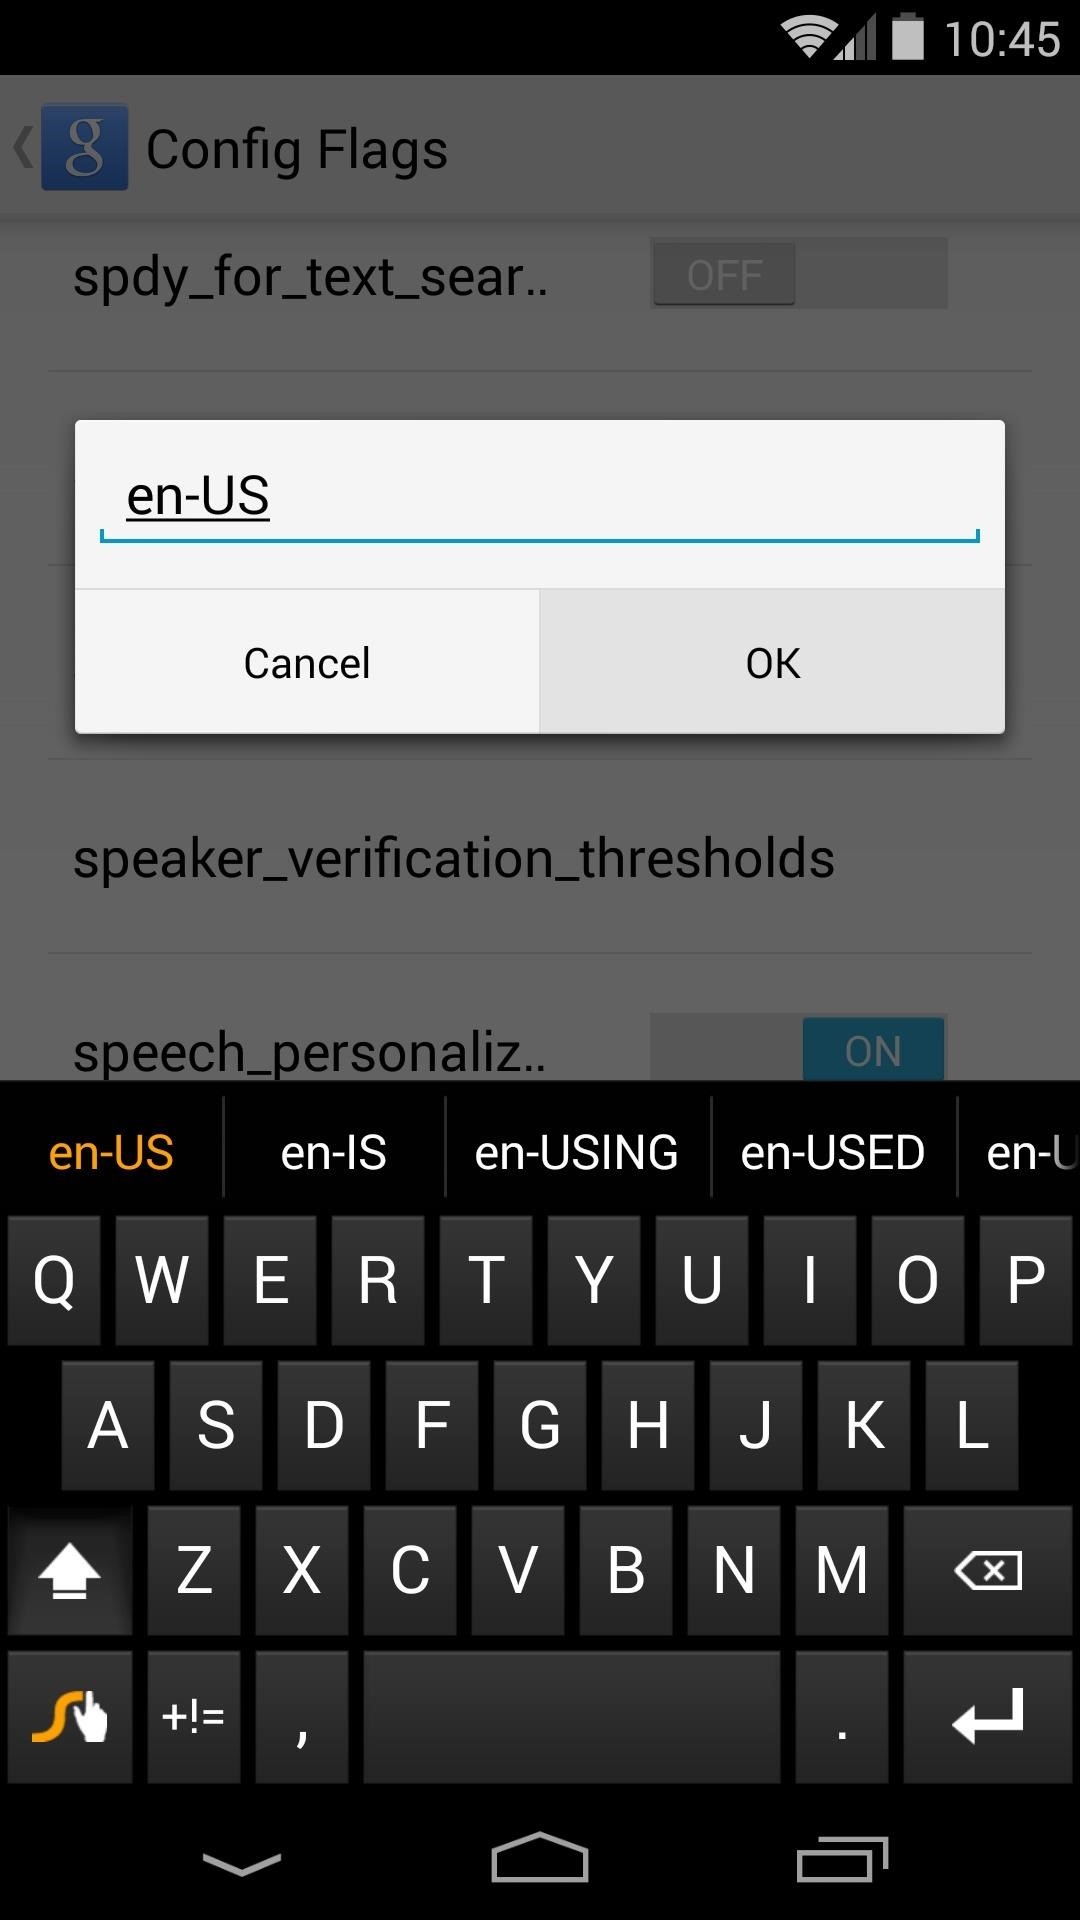 How to Enable "OK, Google" Hotword Detection on Any Screen in Android KitKat